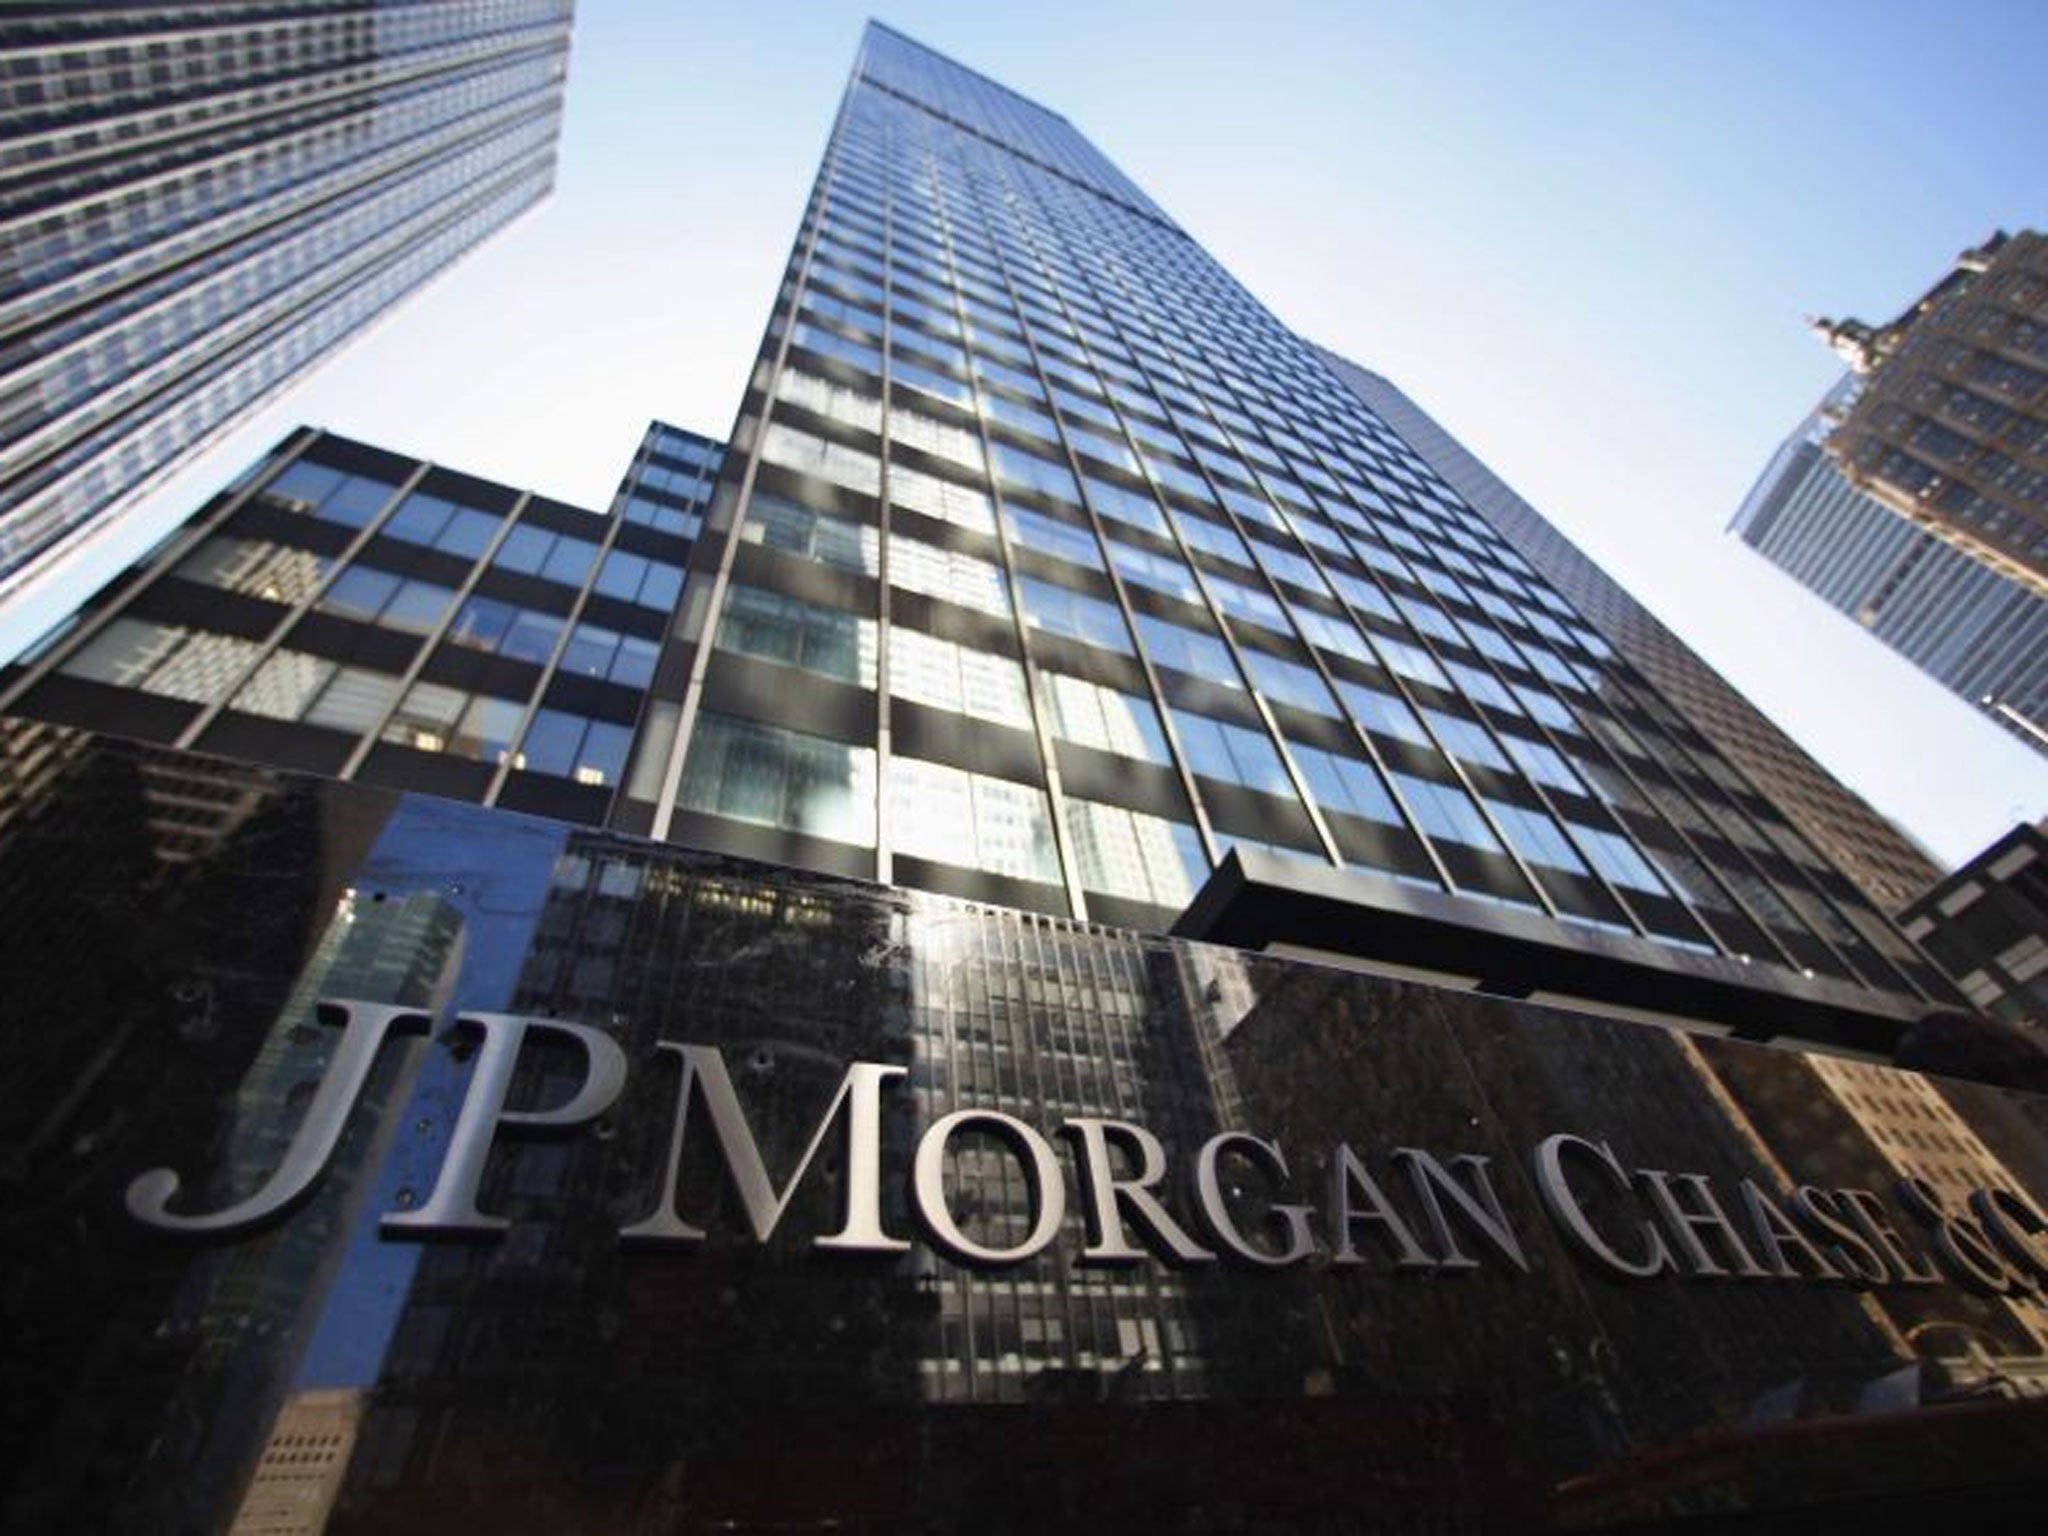 The JPMorgan Chase & Co. headquarters in New York. The bank is set to agree a $13bn compensation deal with the US Justice Department